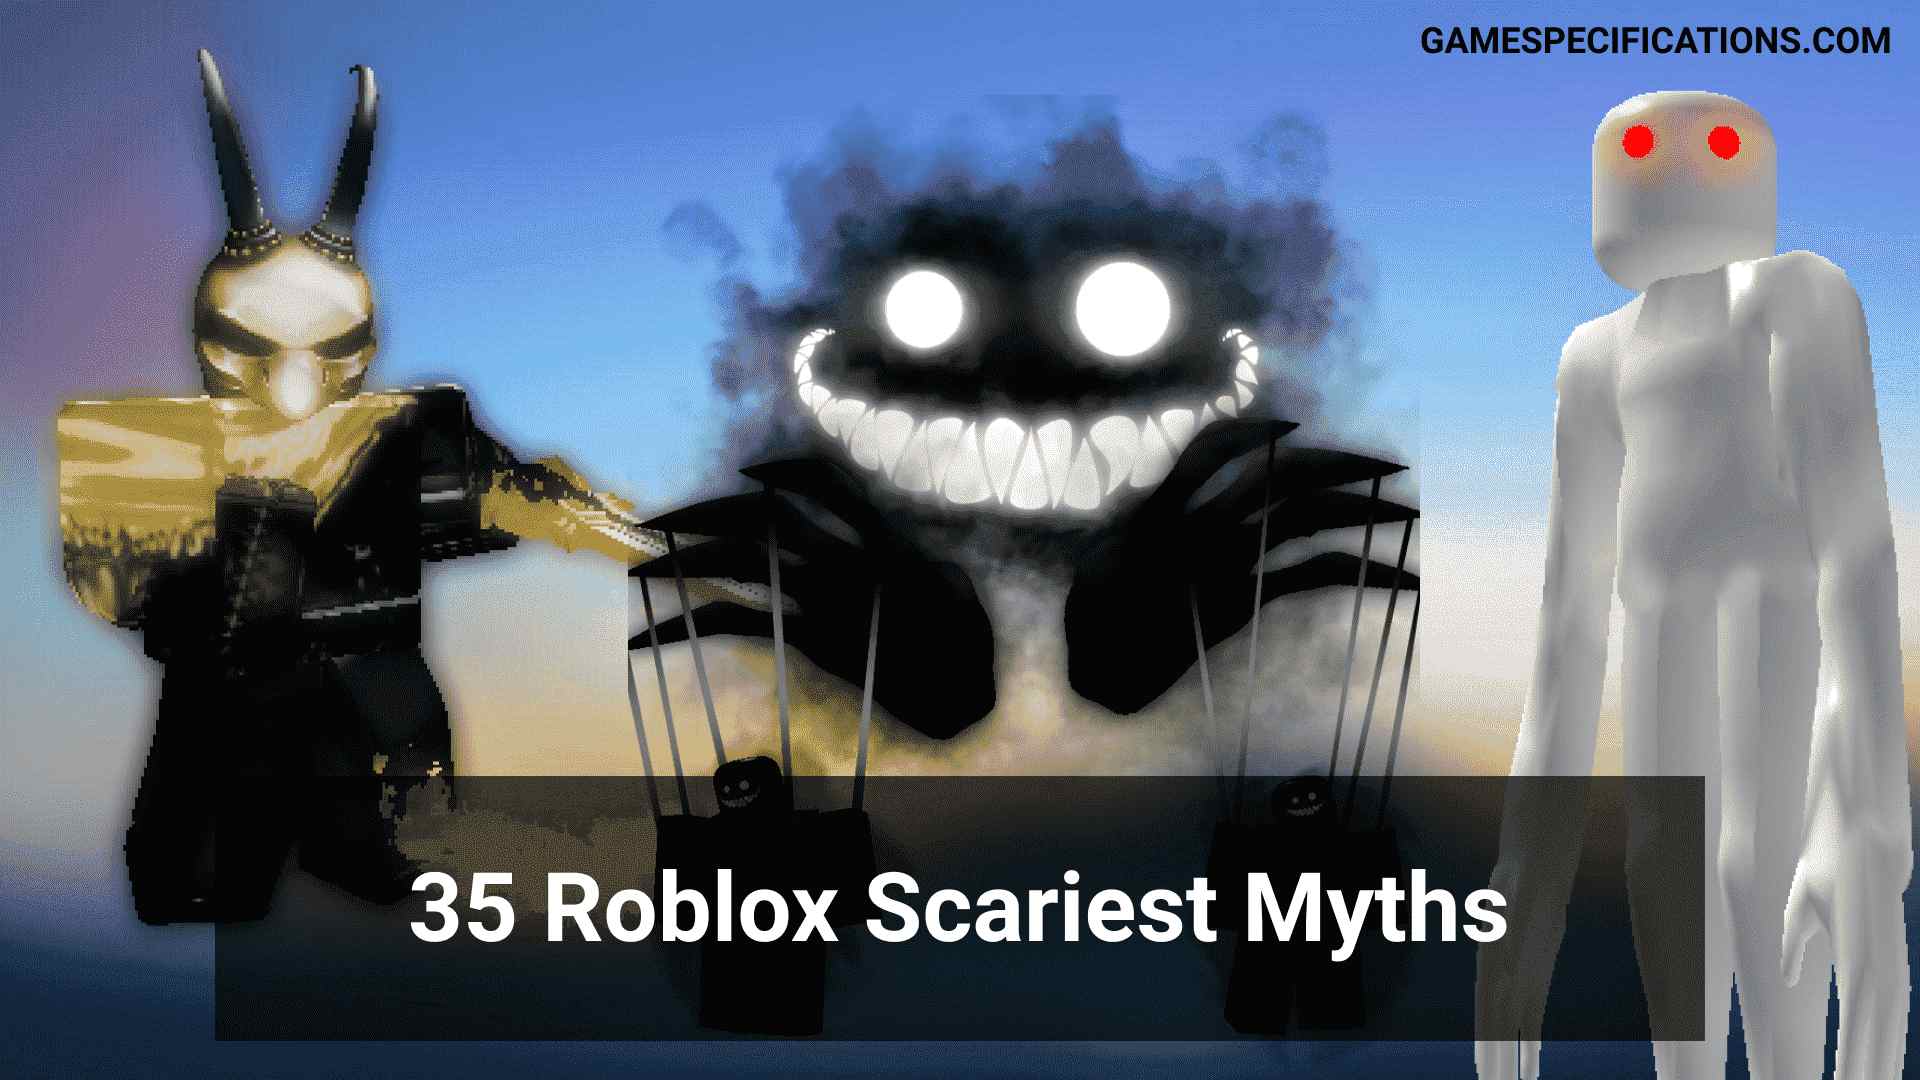 glowing eyes face roblox codes